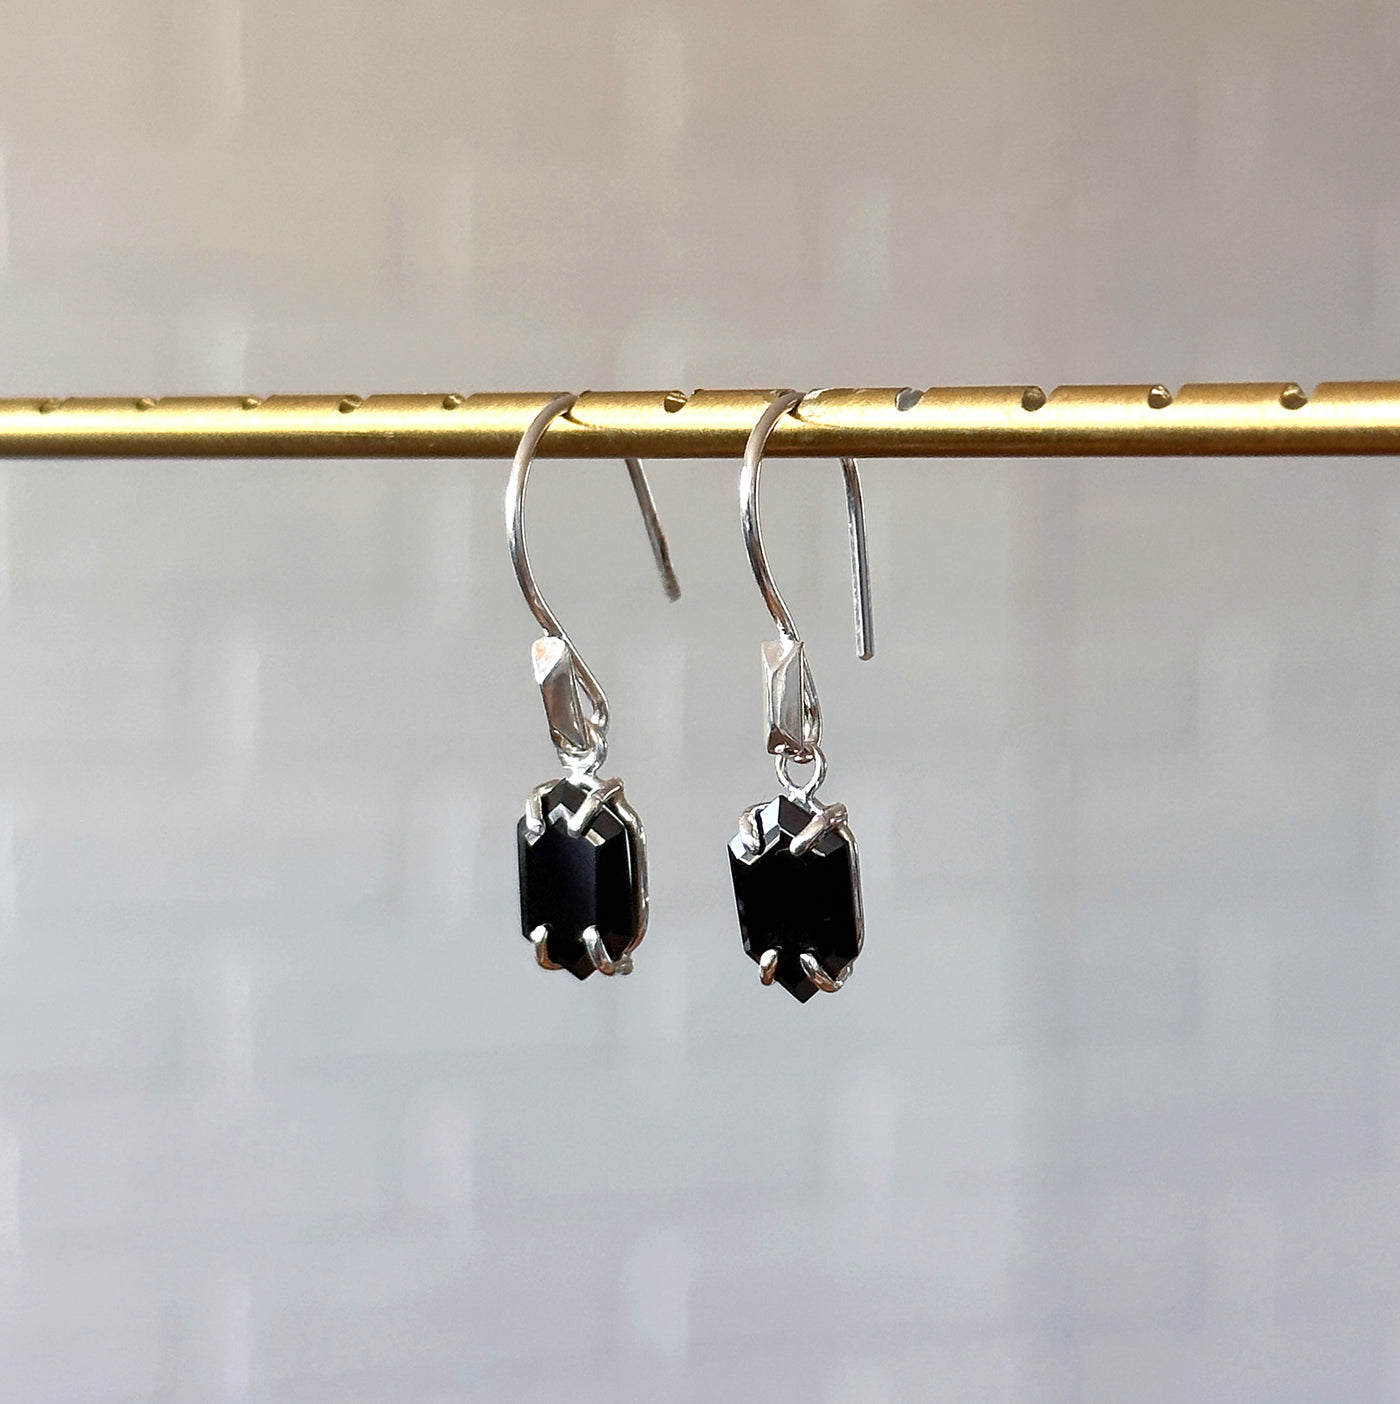 Eloise Black Garnet Earrings in Silver hanging in front of a white brick wall, side angle